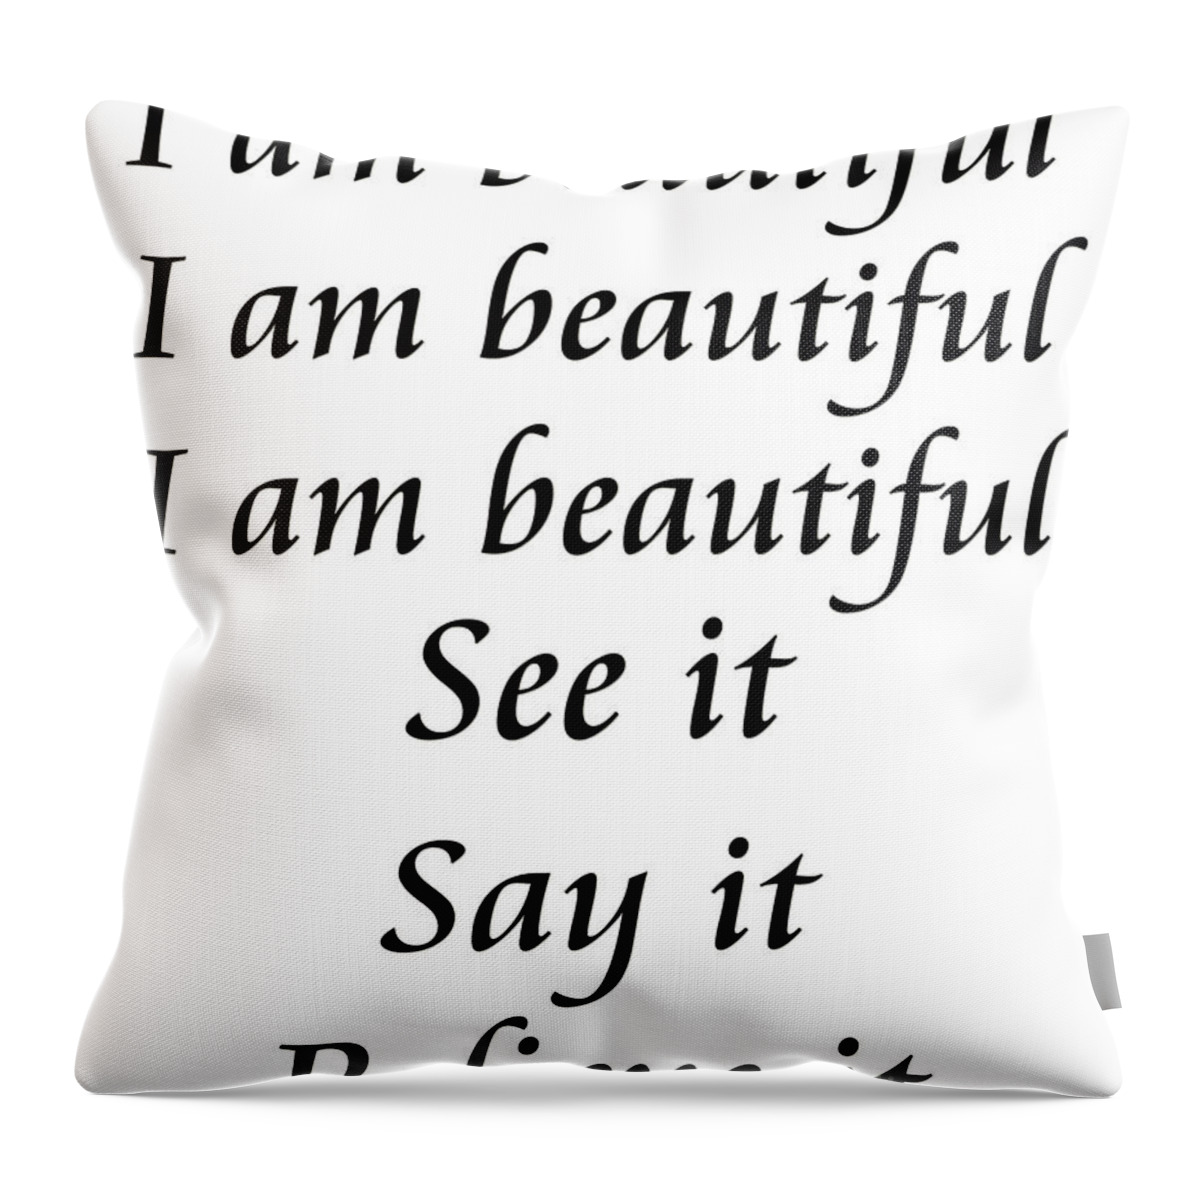 Inspirational Message Sign Throw Pillow featuring the digital art I am beautiful See it Say it Believe it by Andee Design